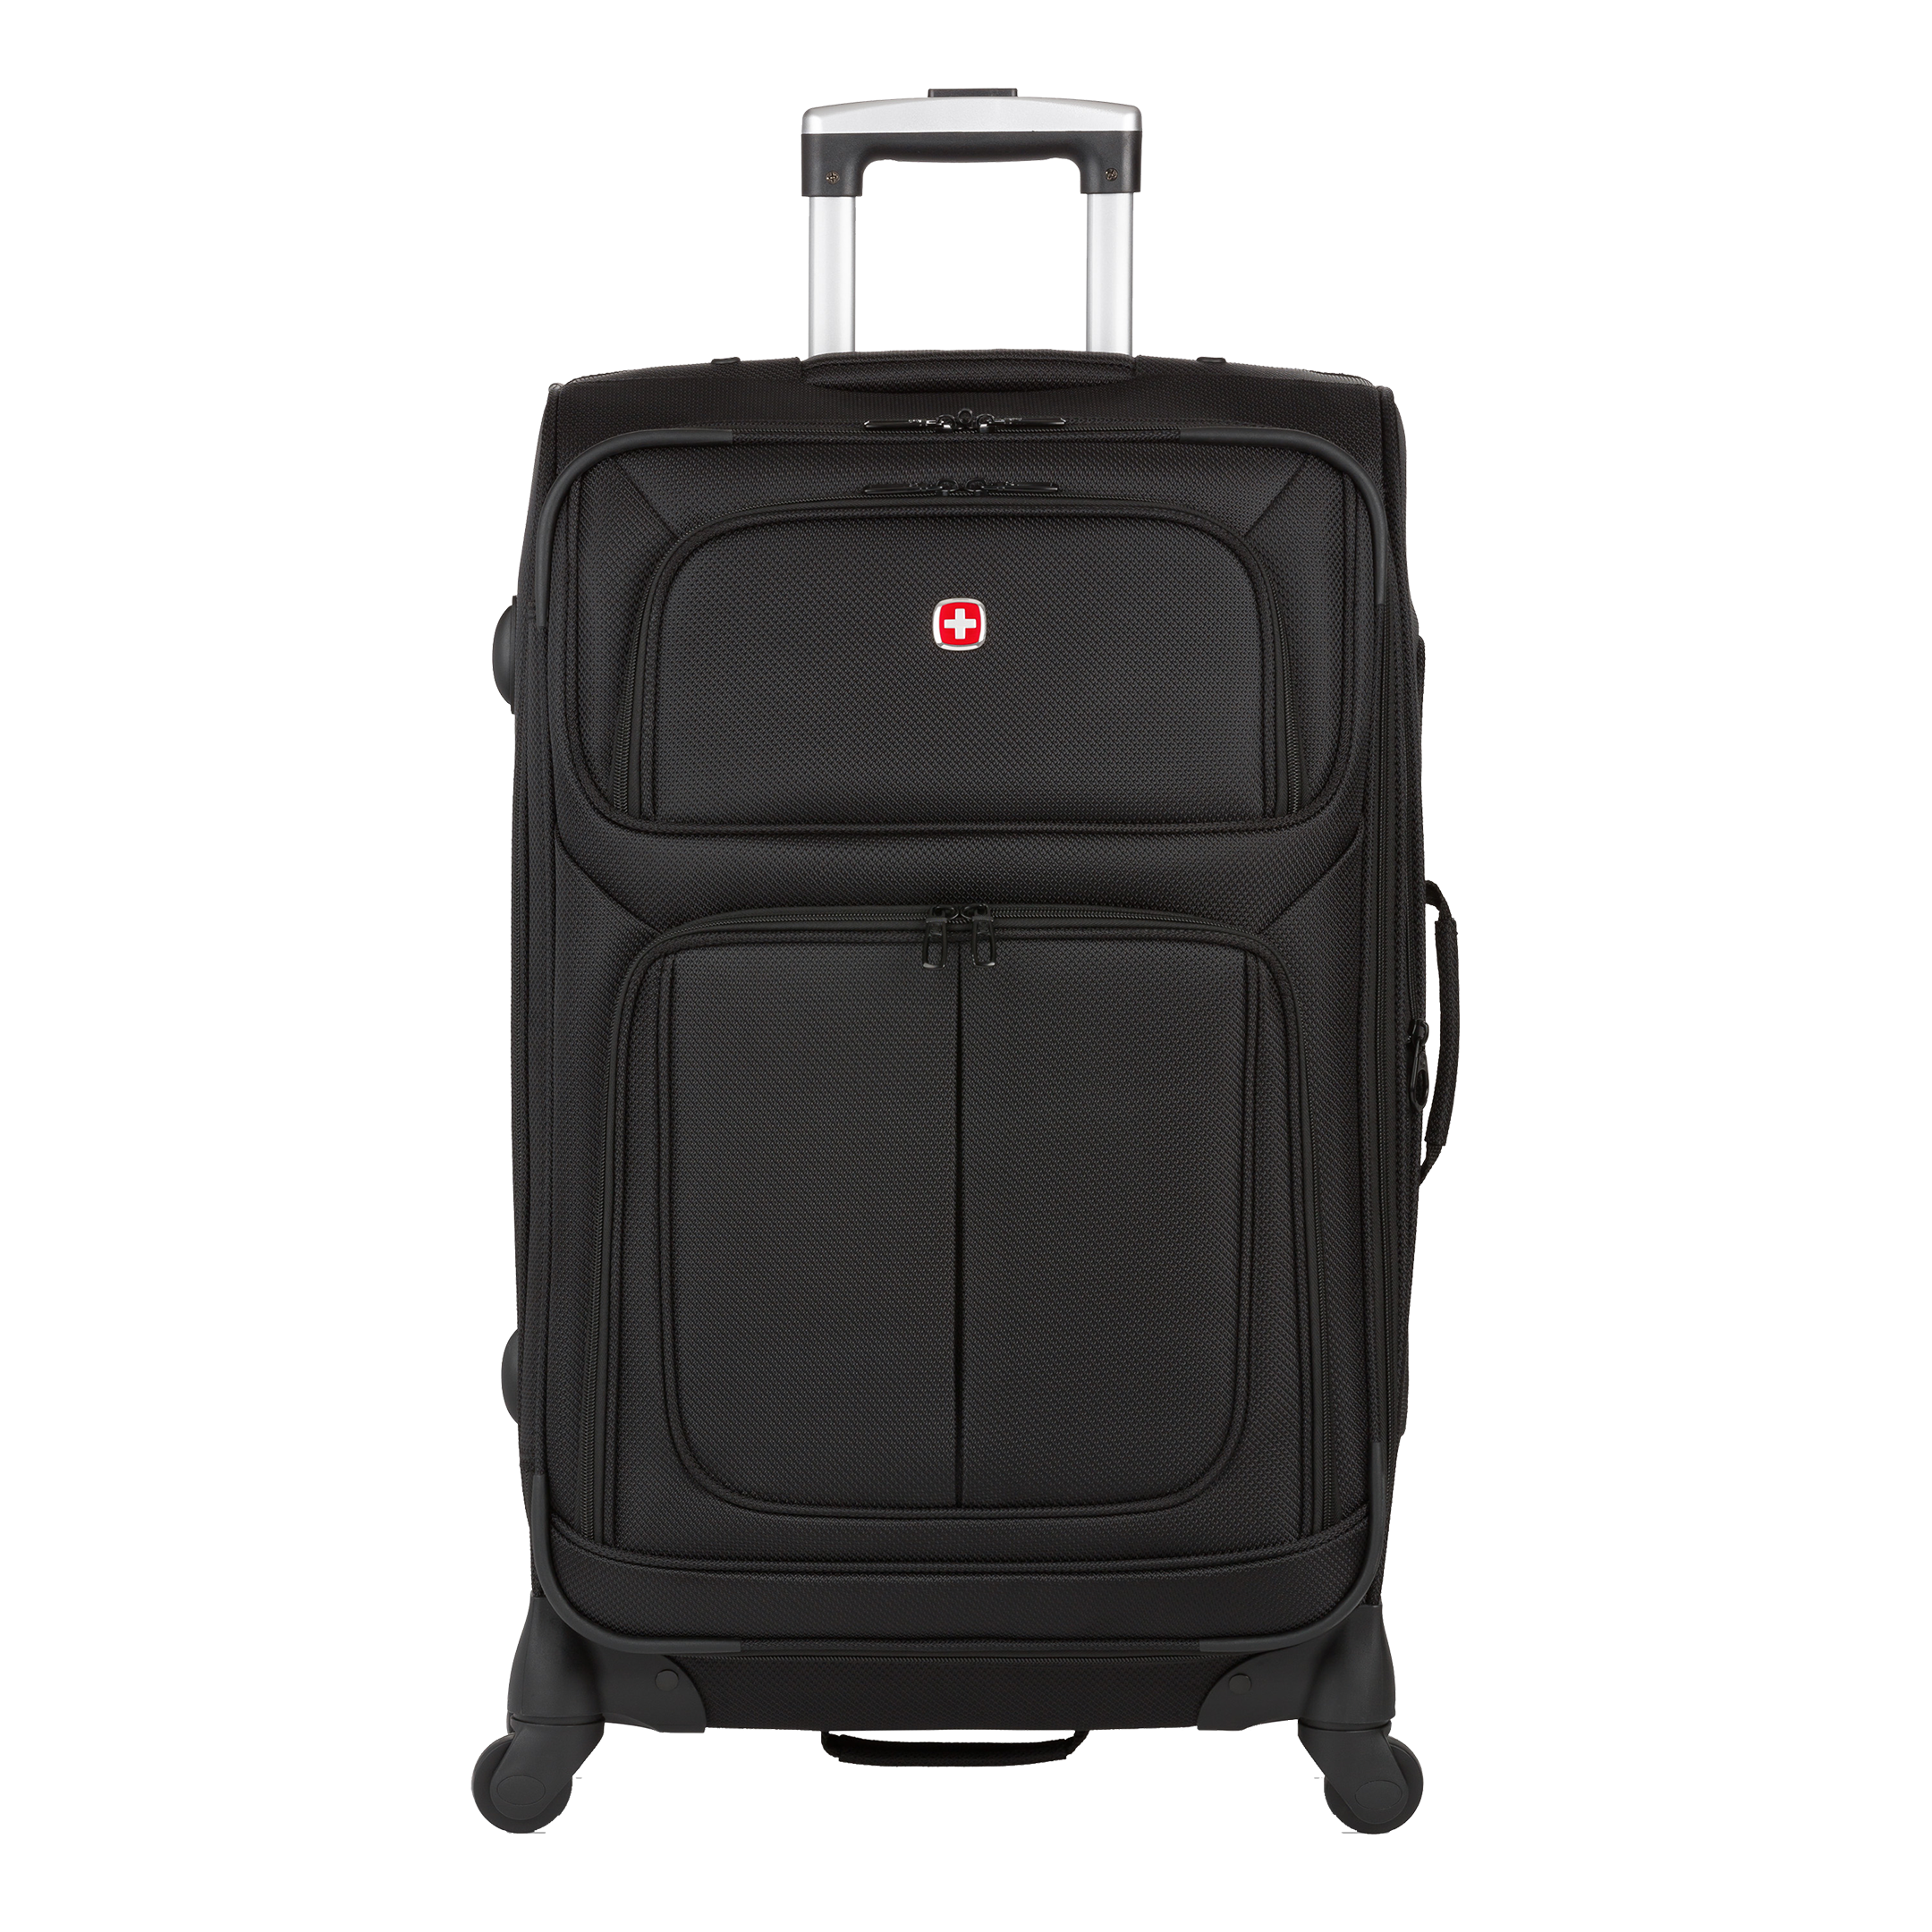 6283 Expandable Carry-On Luggage by SWISSGEAR